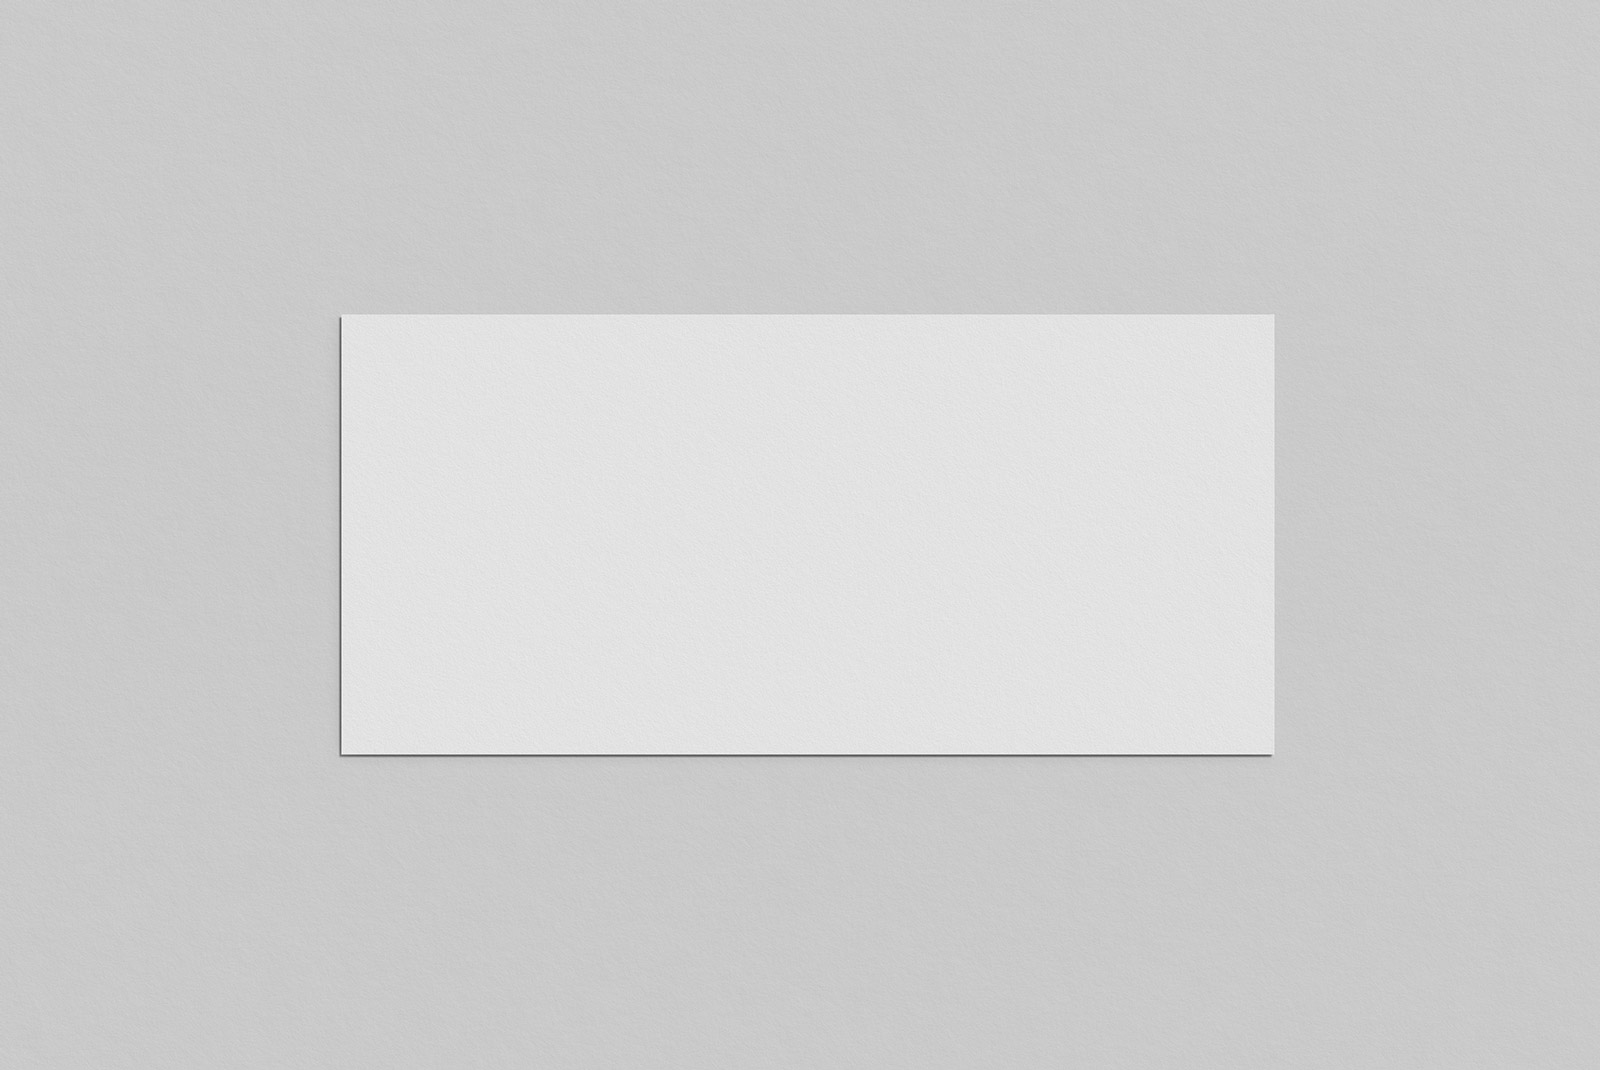 Blank paper card mockup on a textured gray background for presentation of designs and graphics.